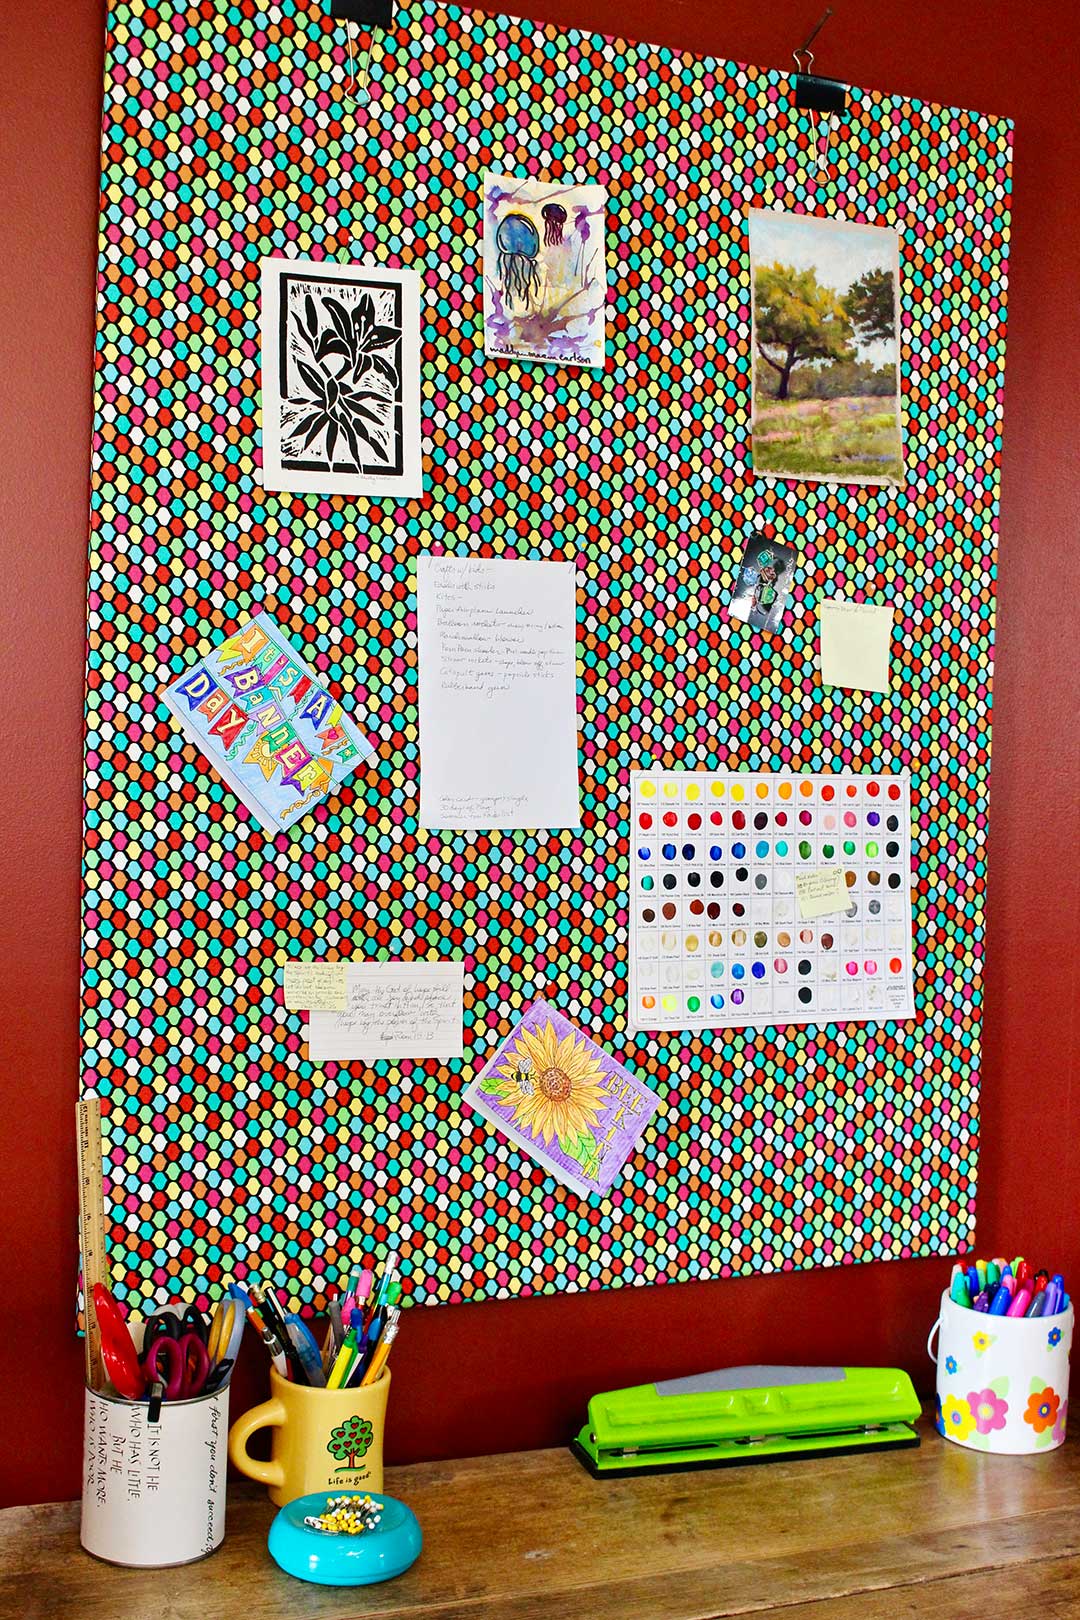 Polka dotted fabric bulletin board secured to a red wall with various cards and papers pinned to it.